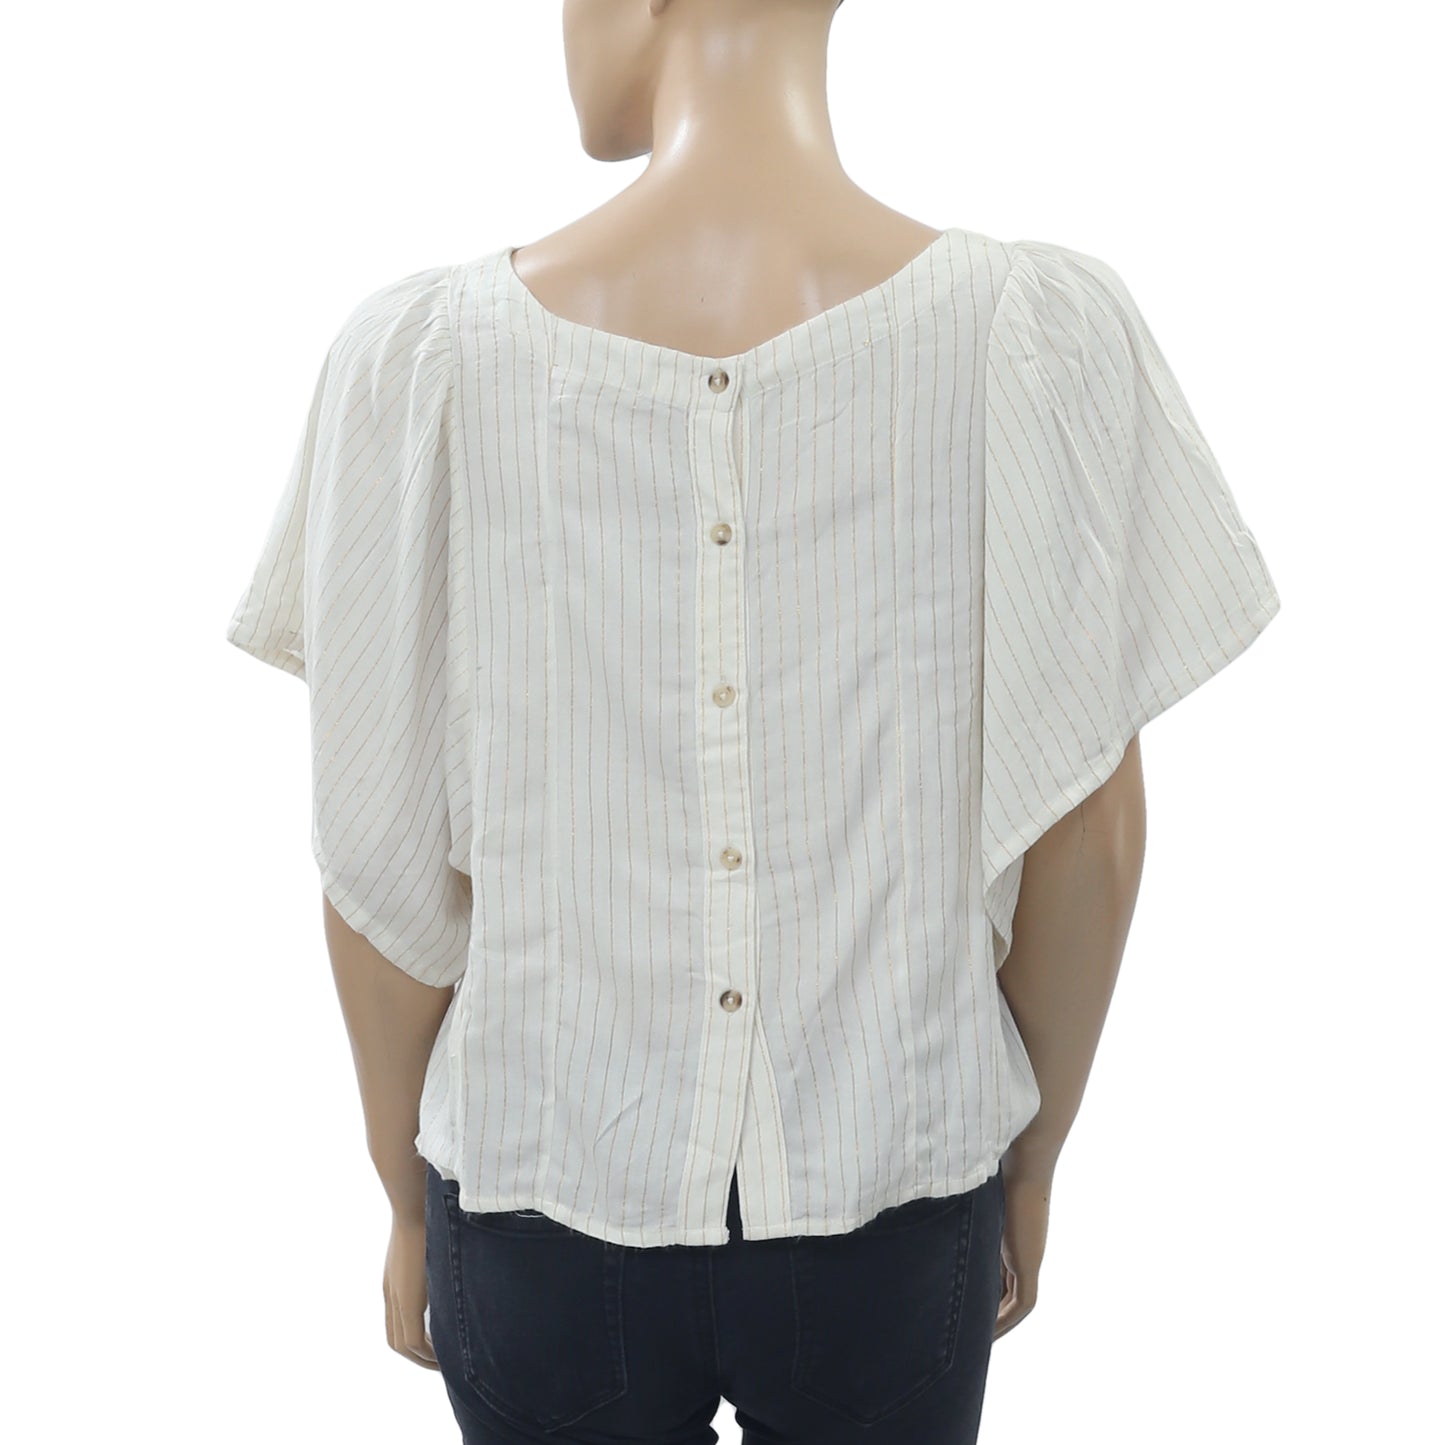 Floreat Anthropologie Shimmer Striped Blouse Top